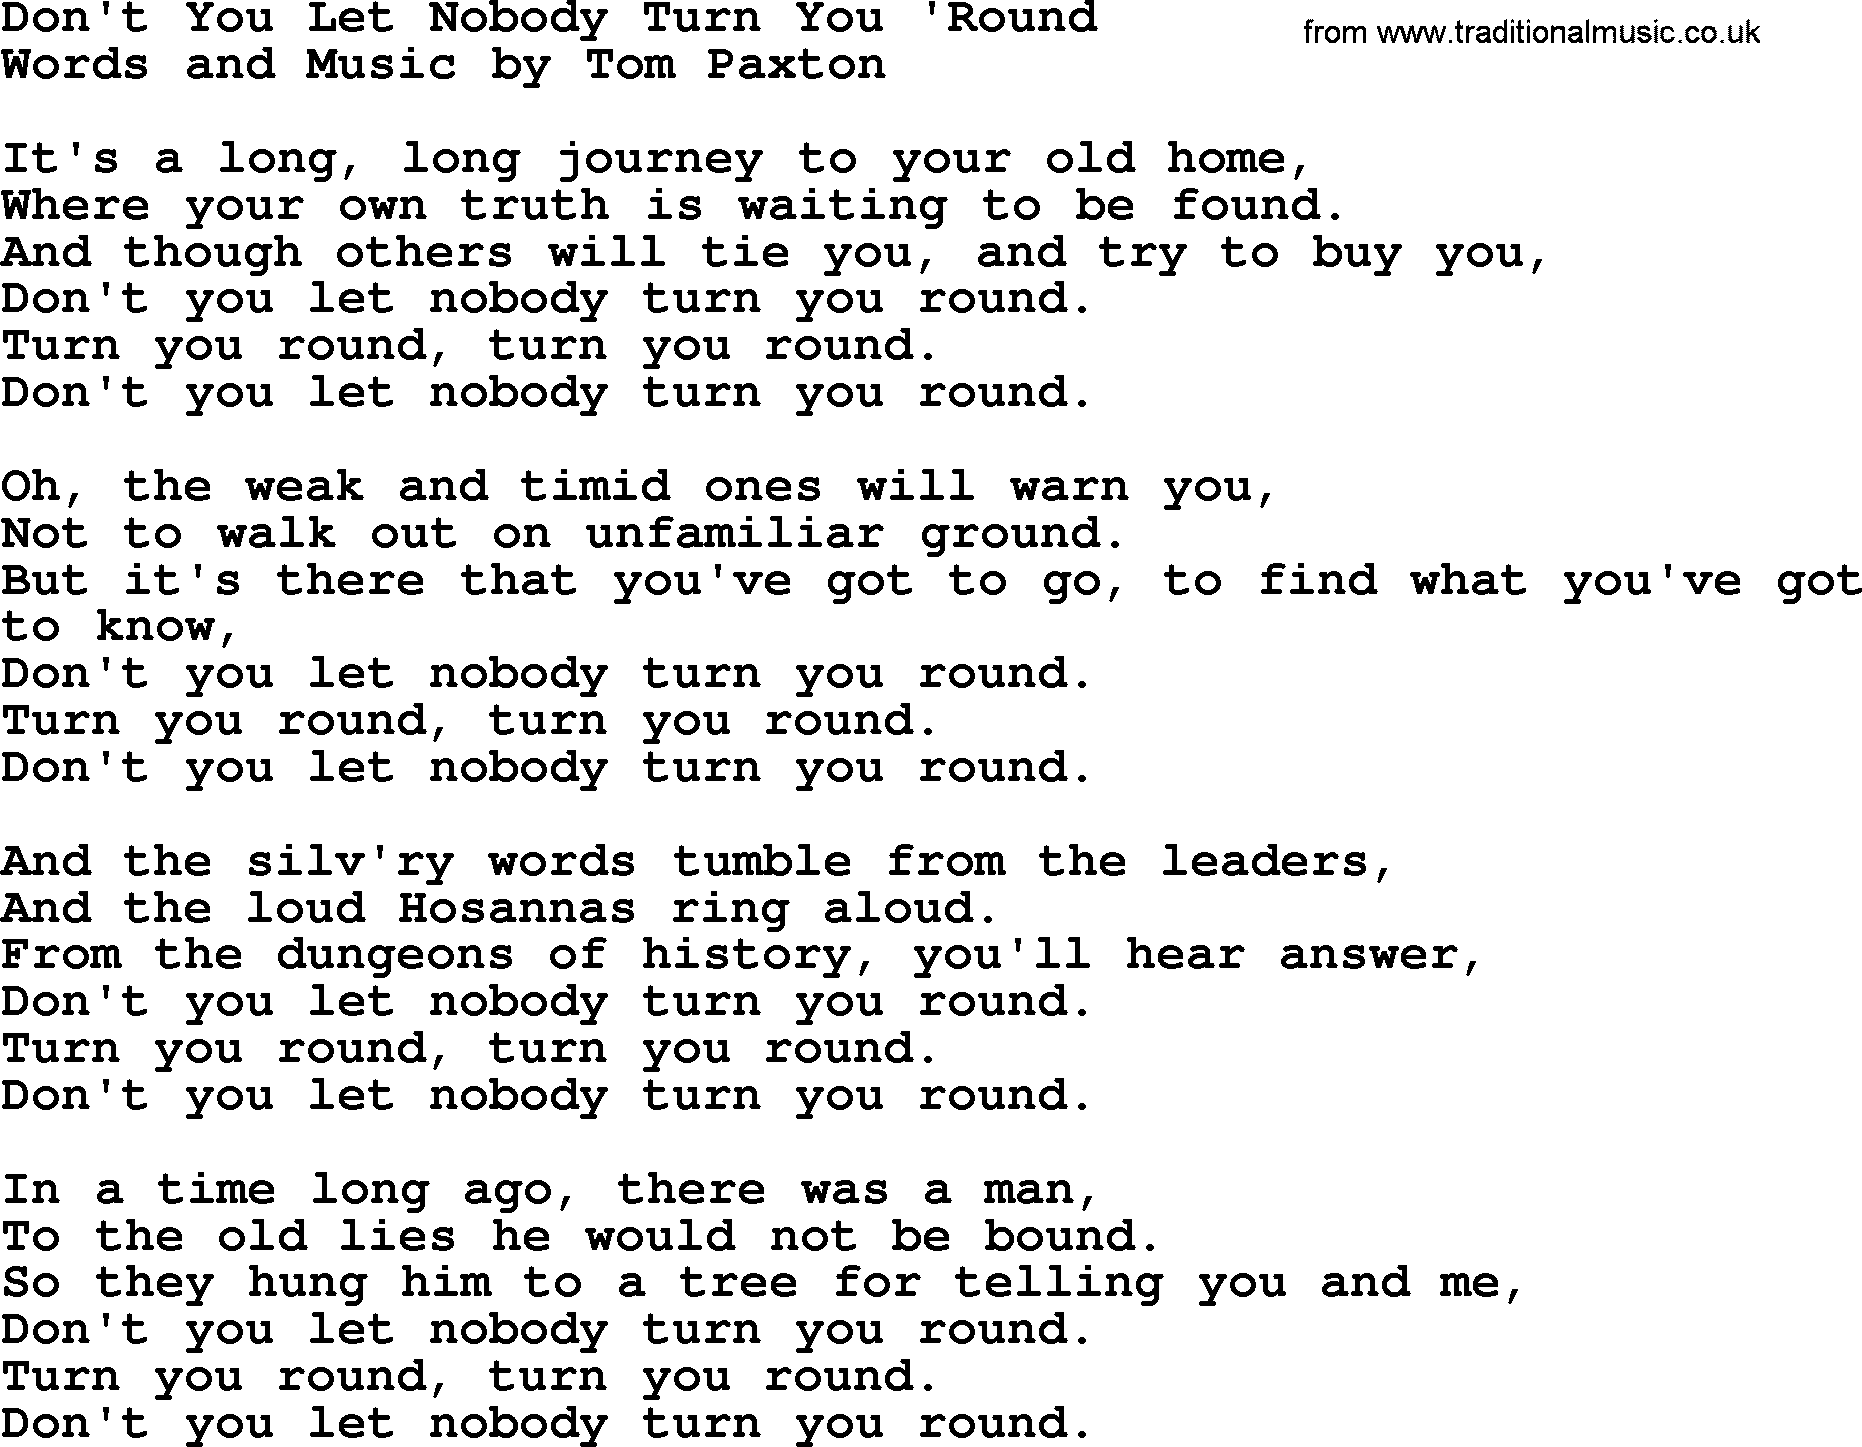 Tom Paxton song: Don't You Let Nobody Turn You 'round, lyrics